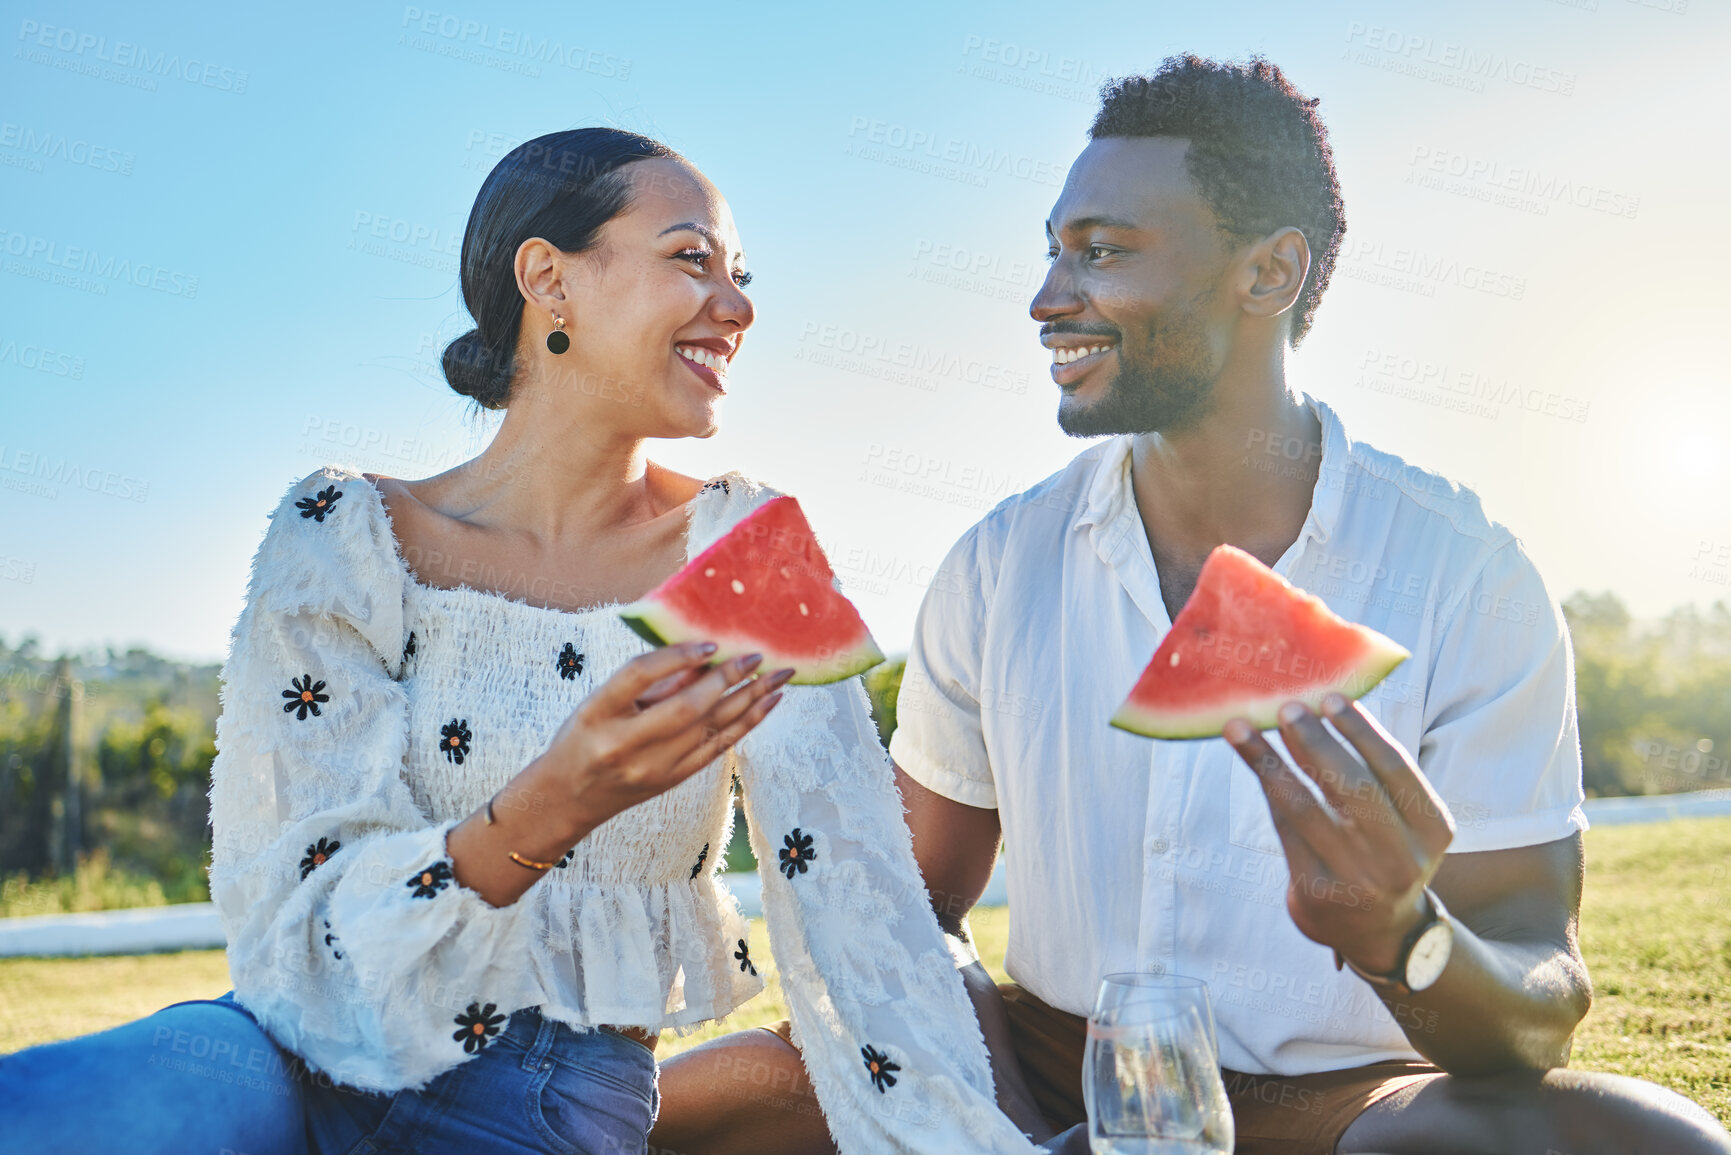 Buy stock photo Watermelon, love or black couple on a picnic to relax on a summer holiday vacation in nature or grass. Partnership, romance or happy black woman enjoys traveling or bonding with a funny black man 